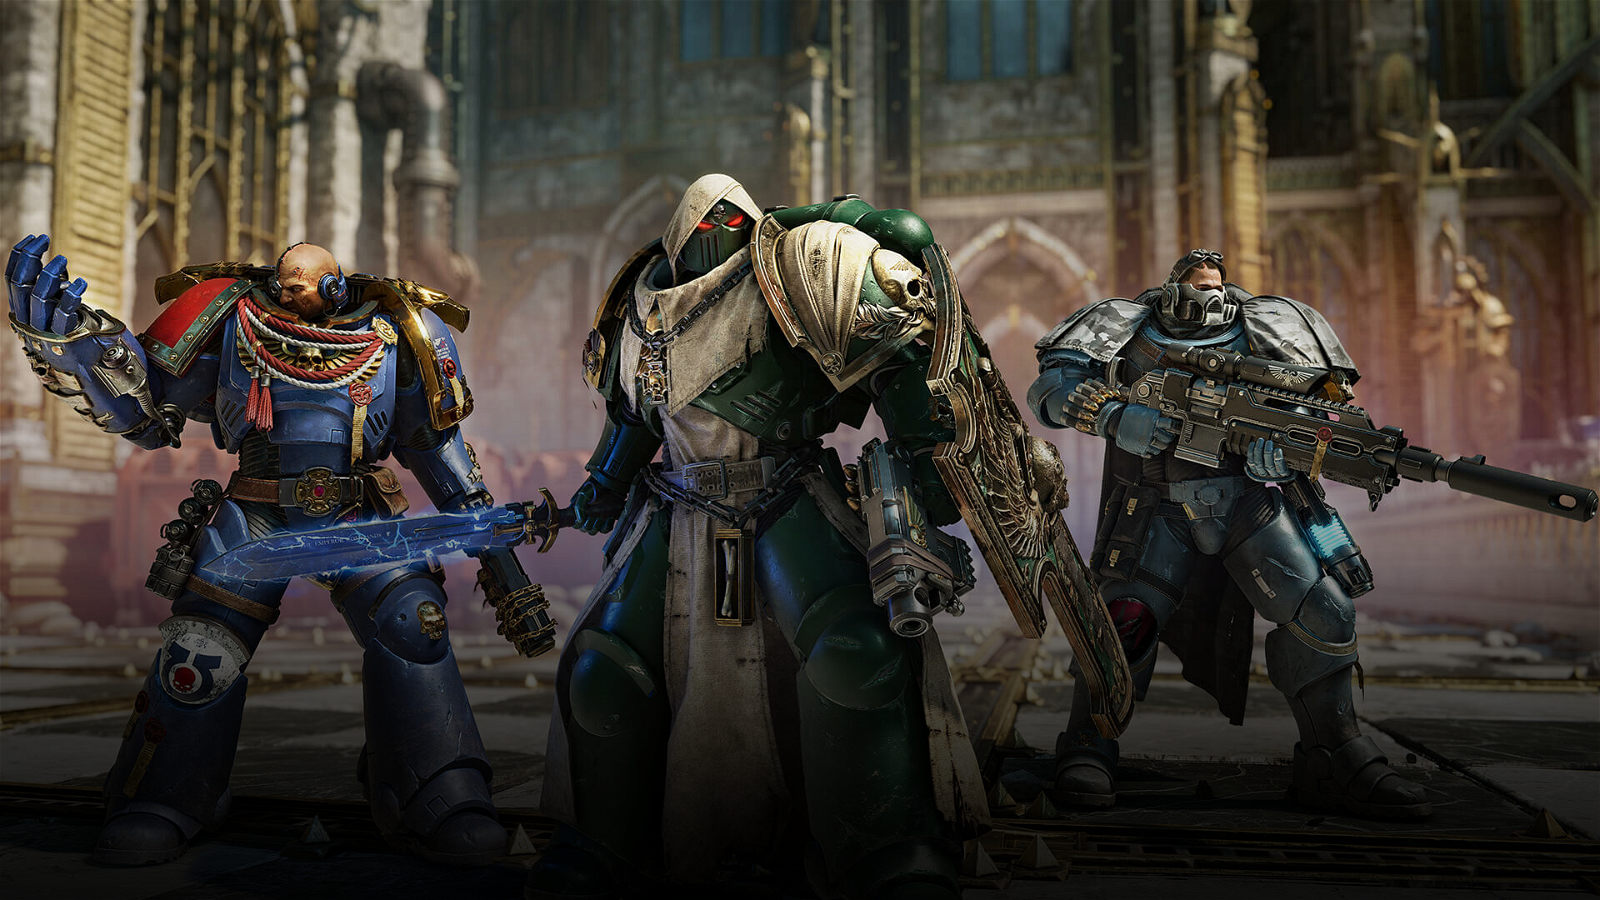 Gears of War, Eat Your Heart Out, as Warhammer 40K: Space Marine 2 Showcases Most Iconic Weapon